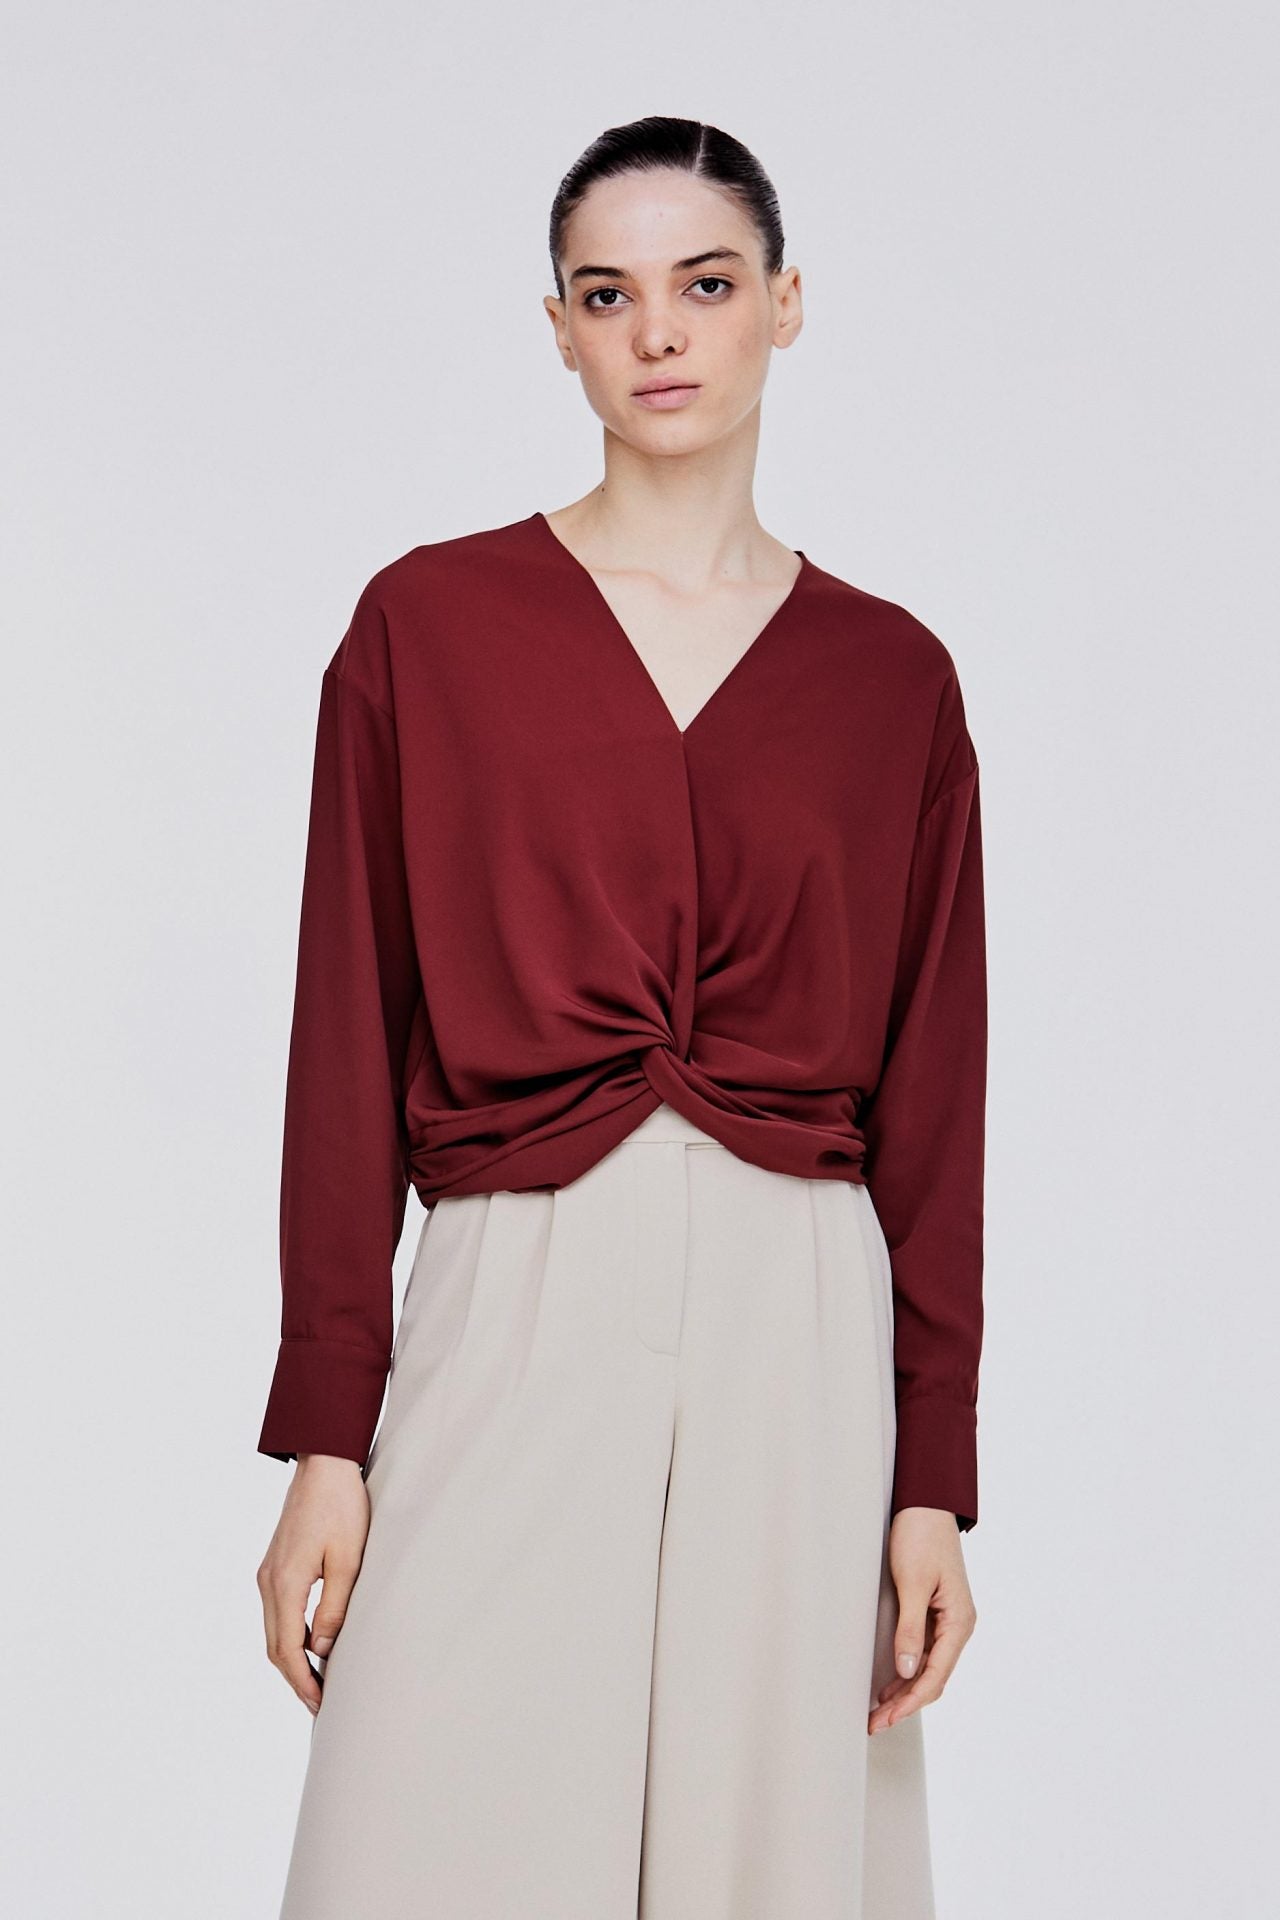 ABL 9848 FRONT DETAILS LONG SLEEVES BLOUSE WINE